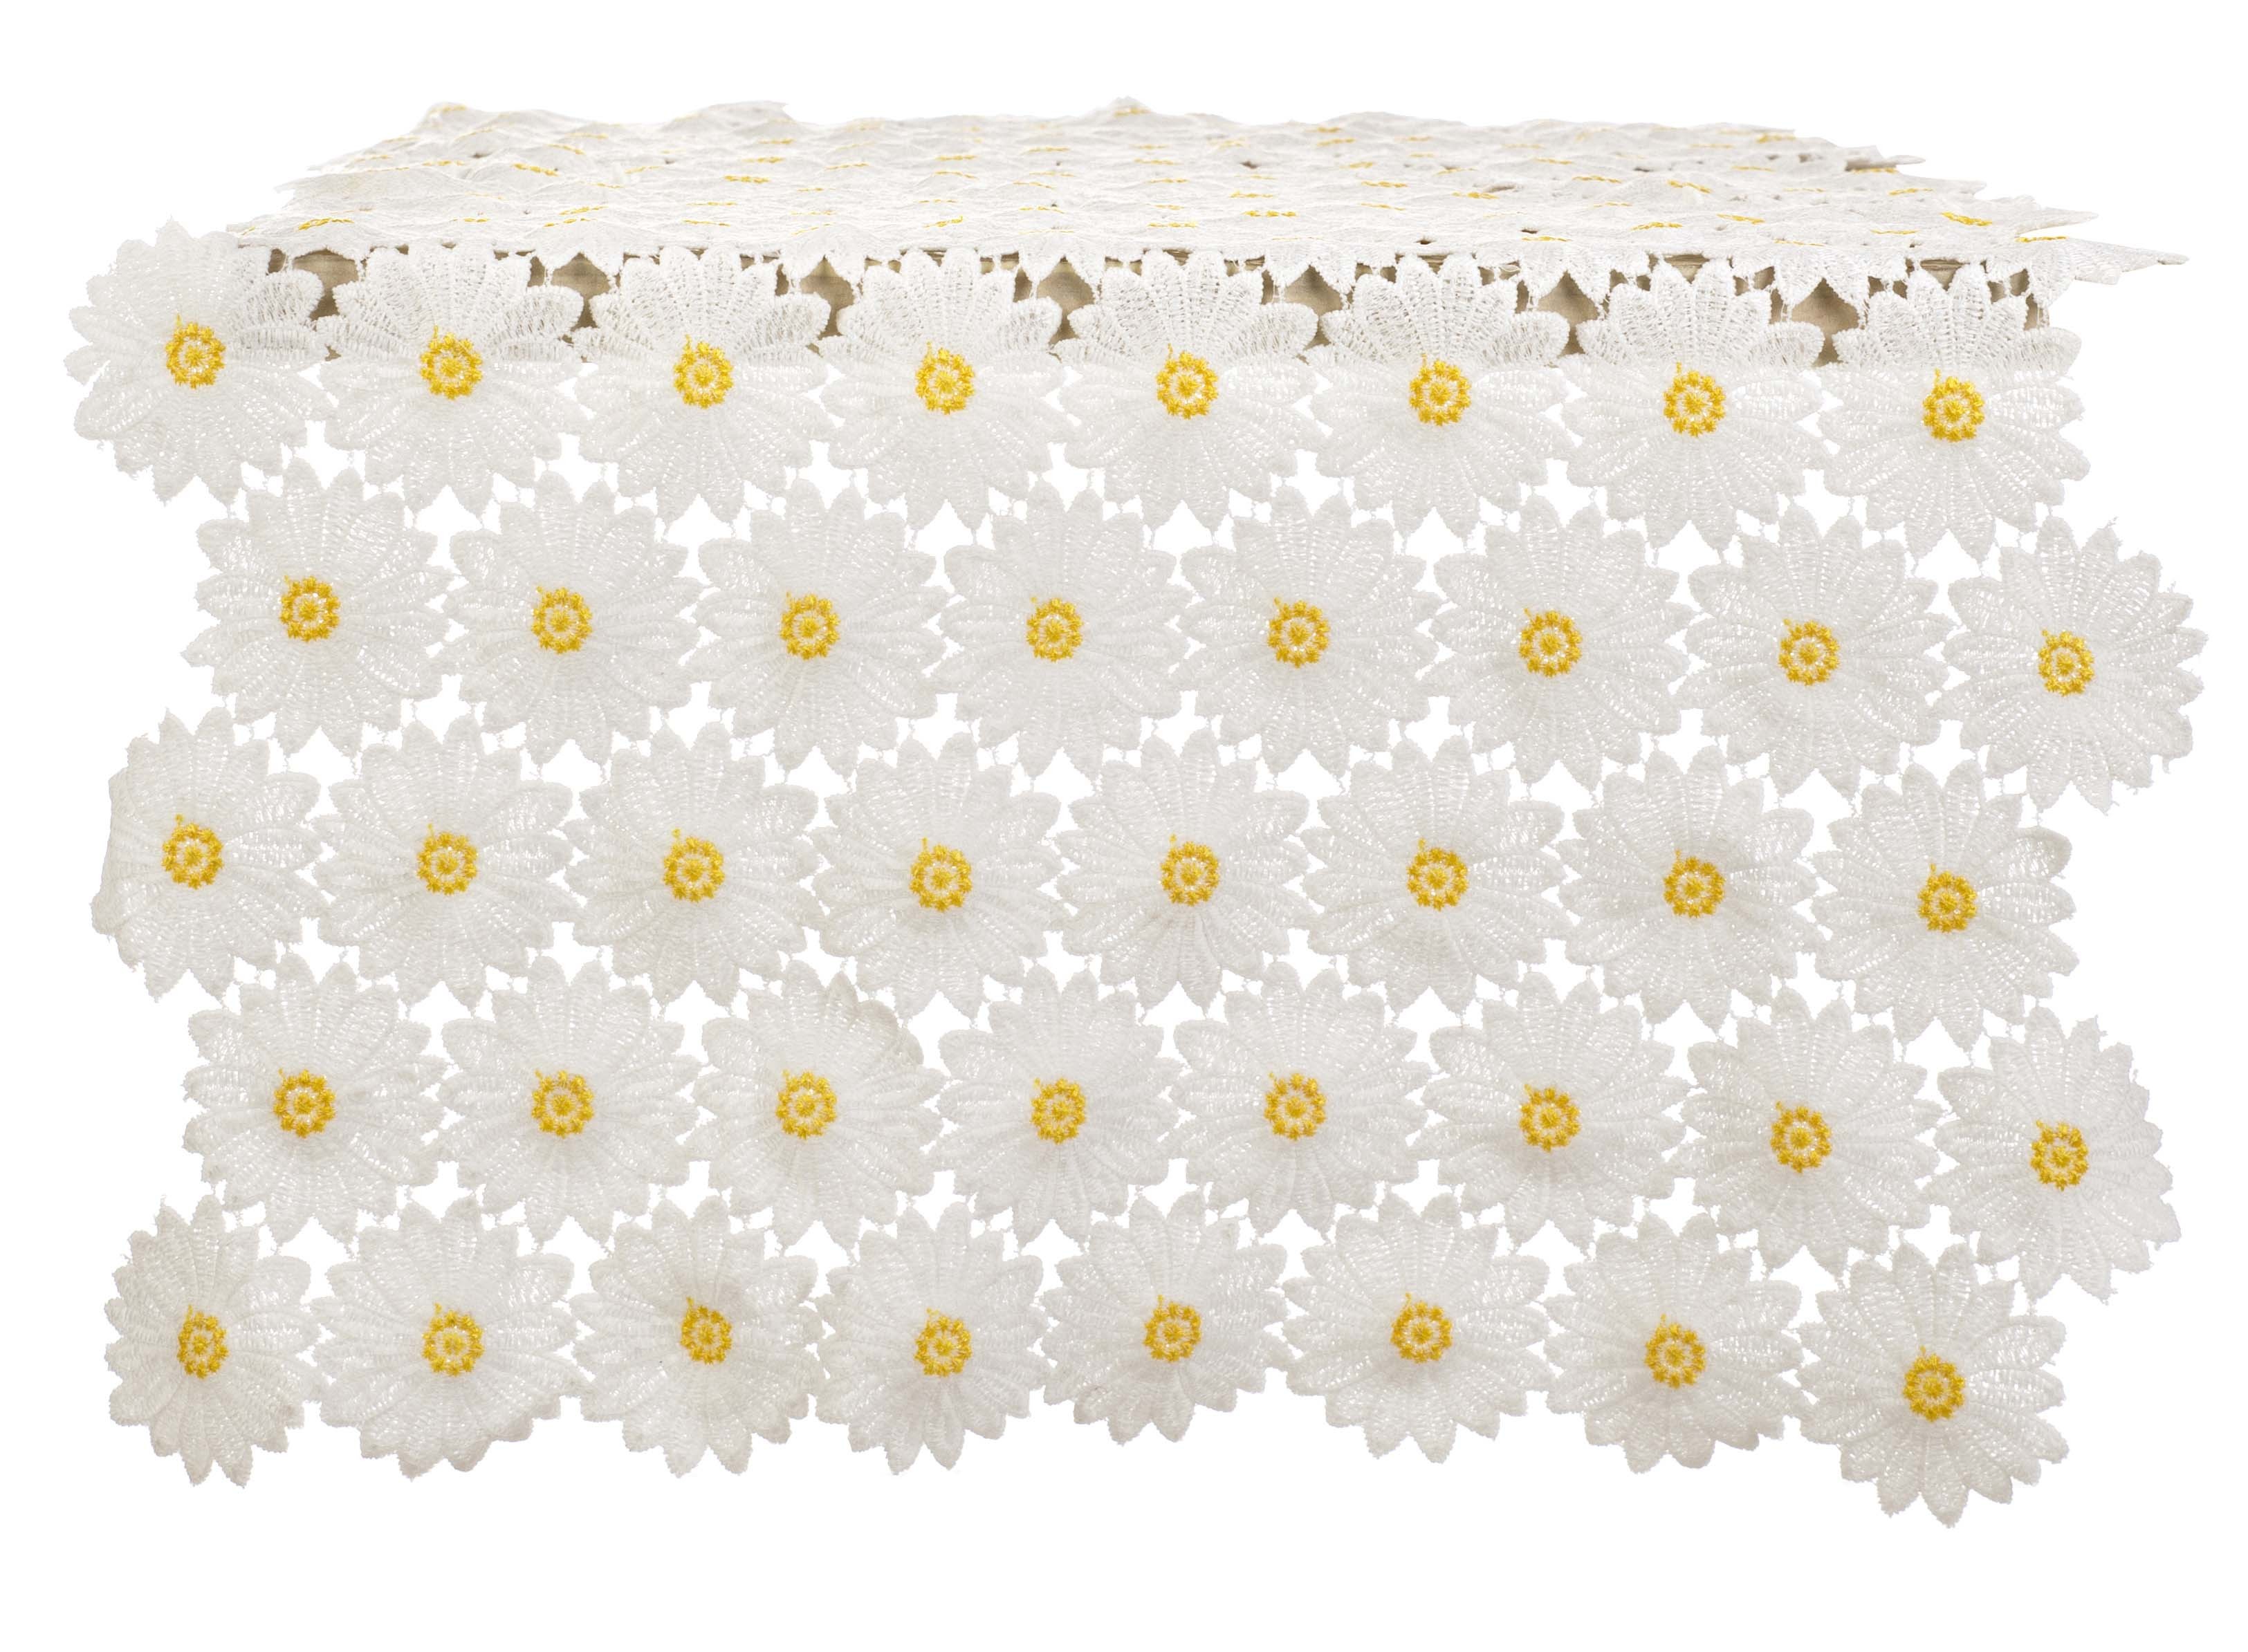 Daisy lace runner by Blanc Mariclo collection ideal for a shabby